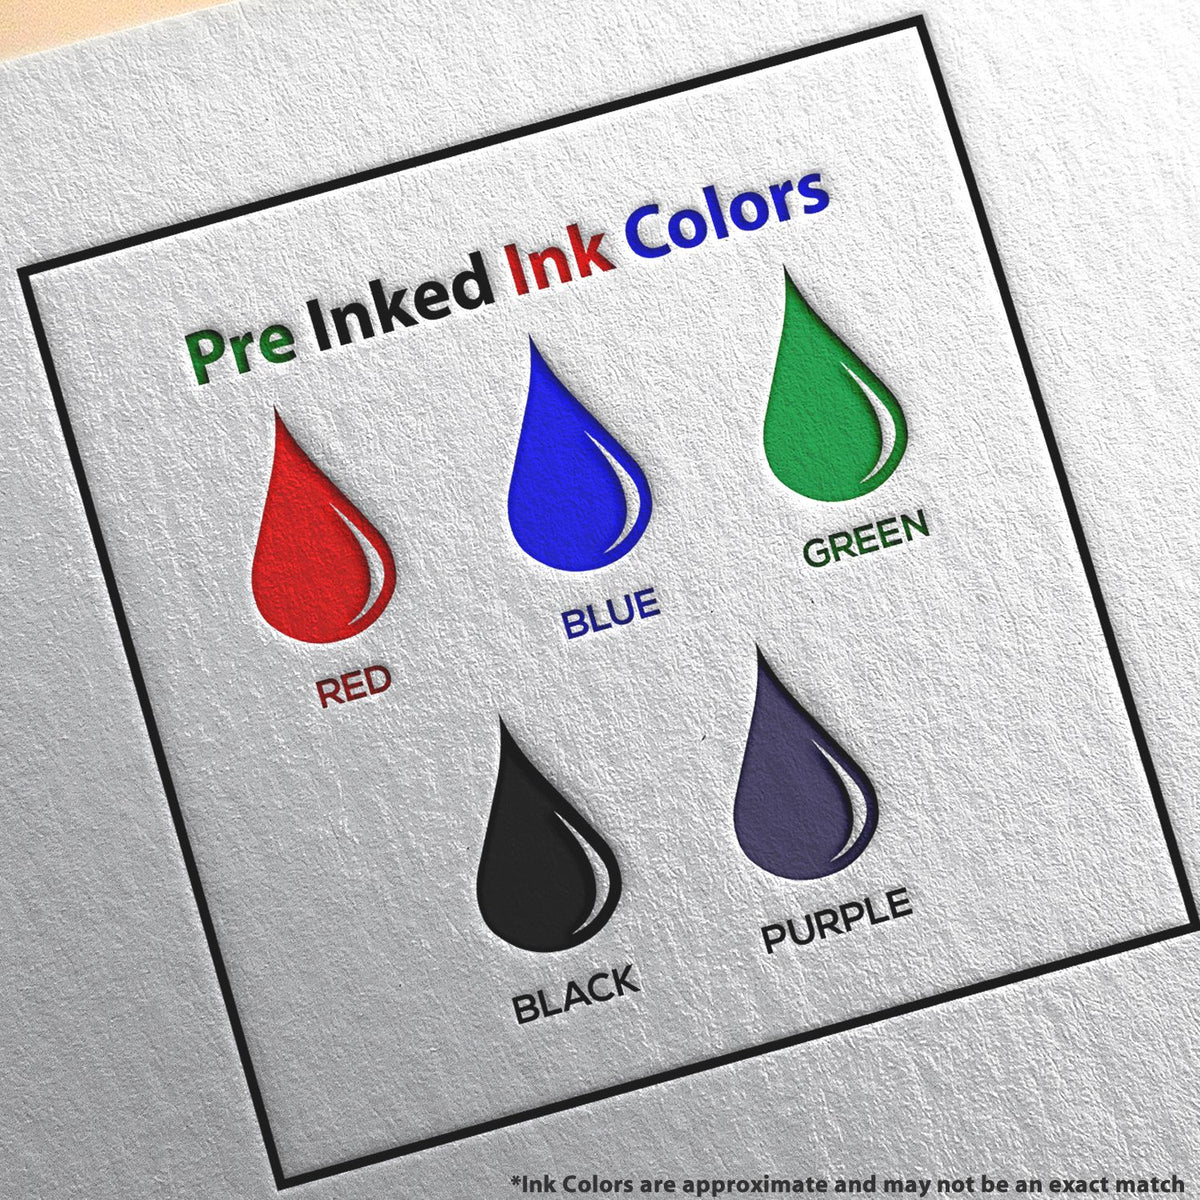 A picture showing the different ink colors or hues available for the Slim Pre-Inked Rectangular Notary Stamp for Arkansas product.